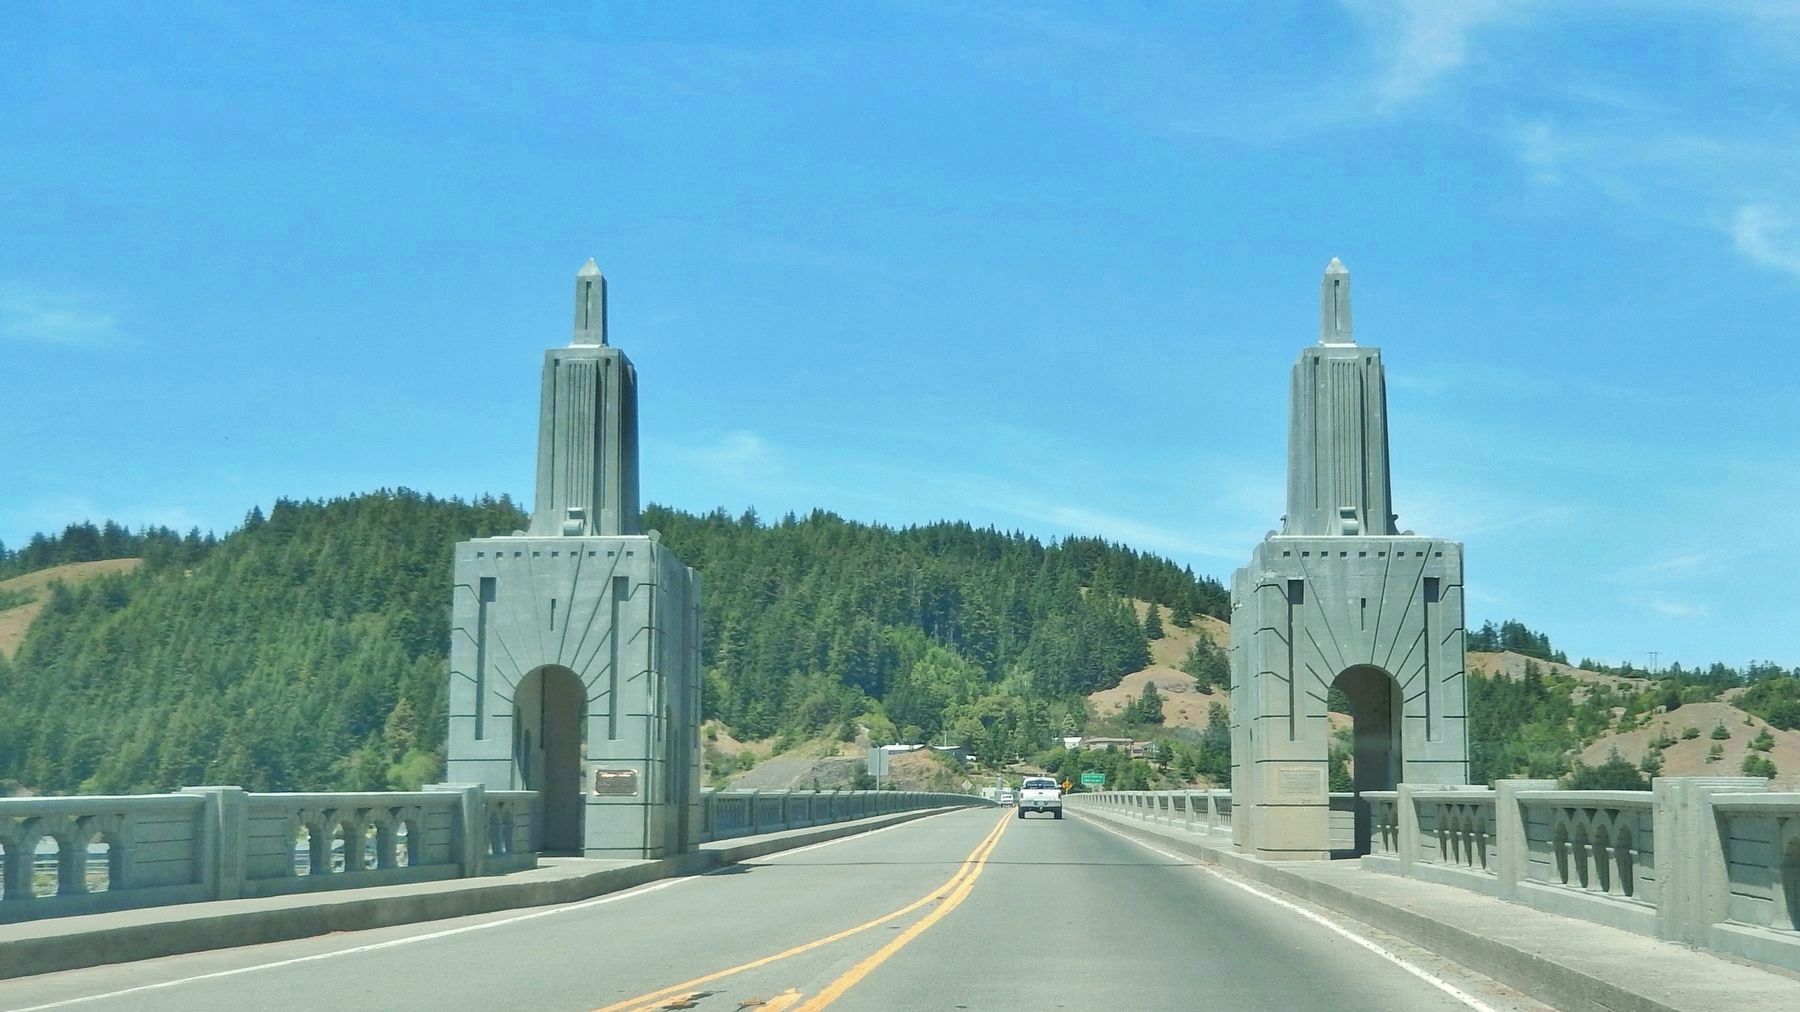 Patterson Bridge (<i>south Art Deco bridge piers and railings as seen from highway</i>) image. Click for full size.